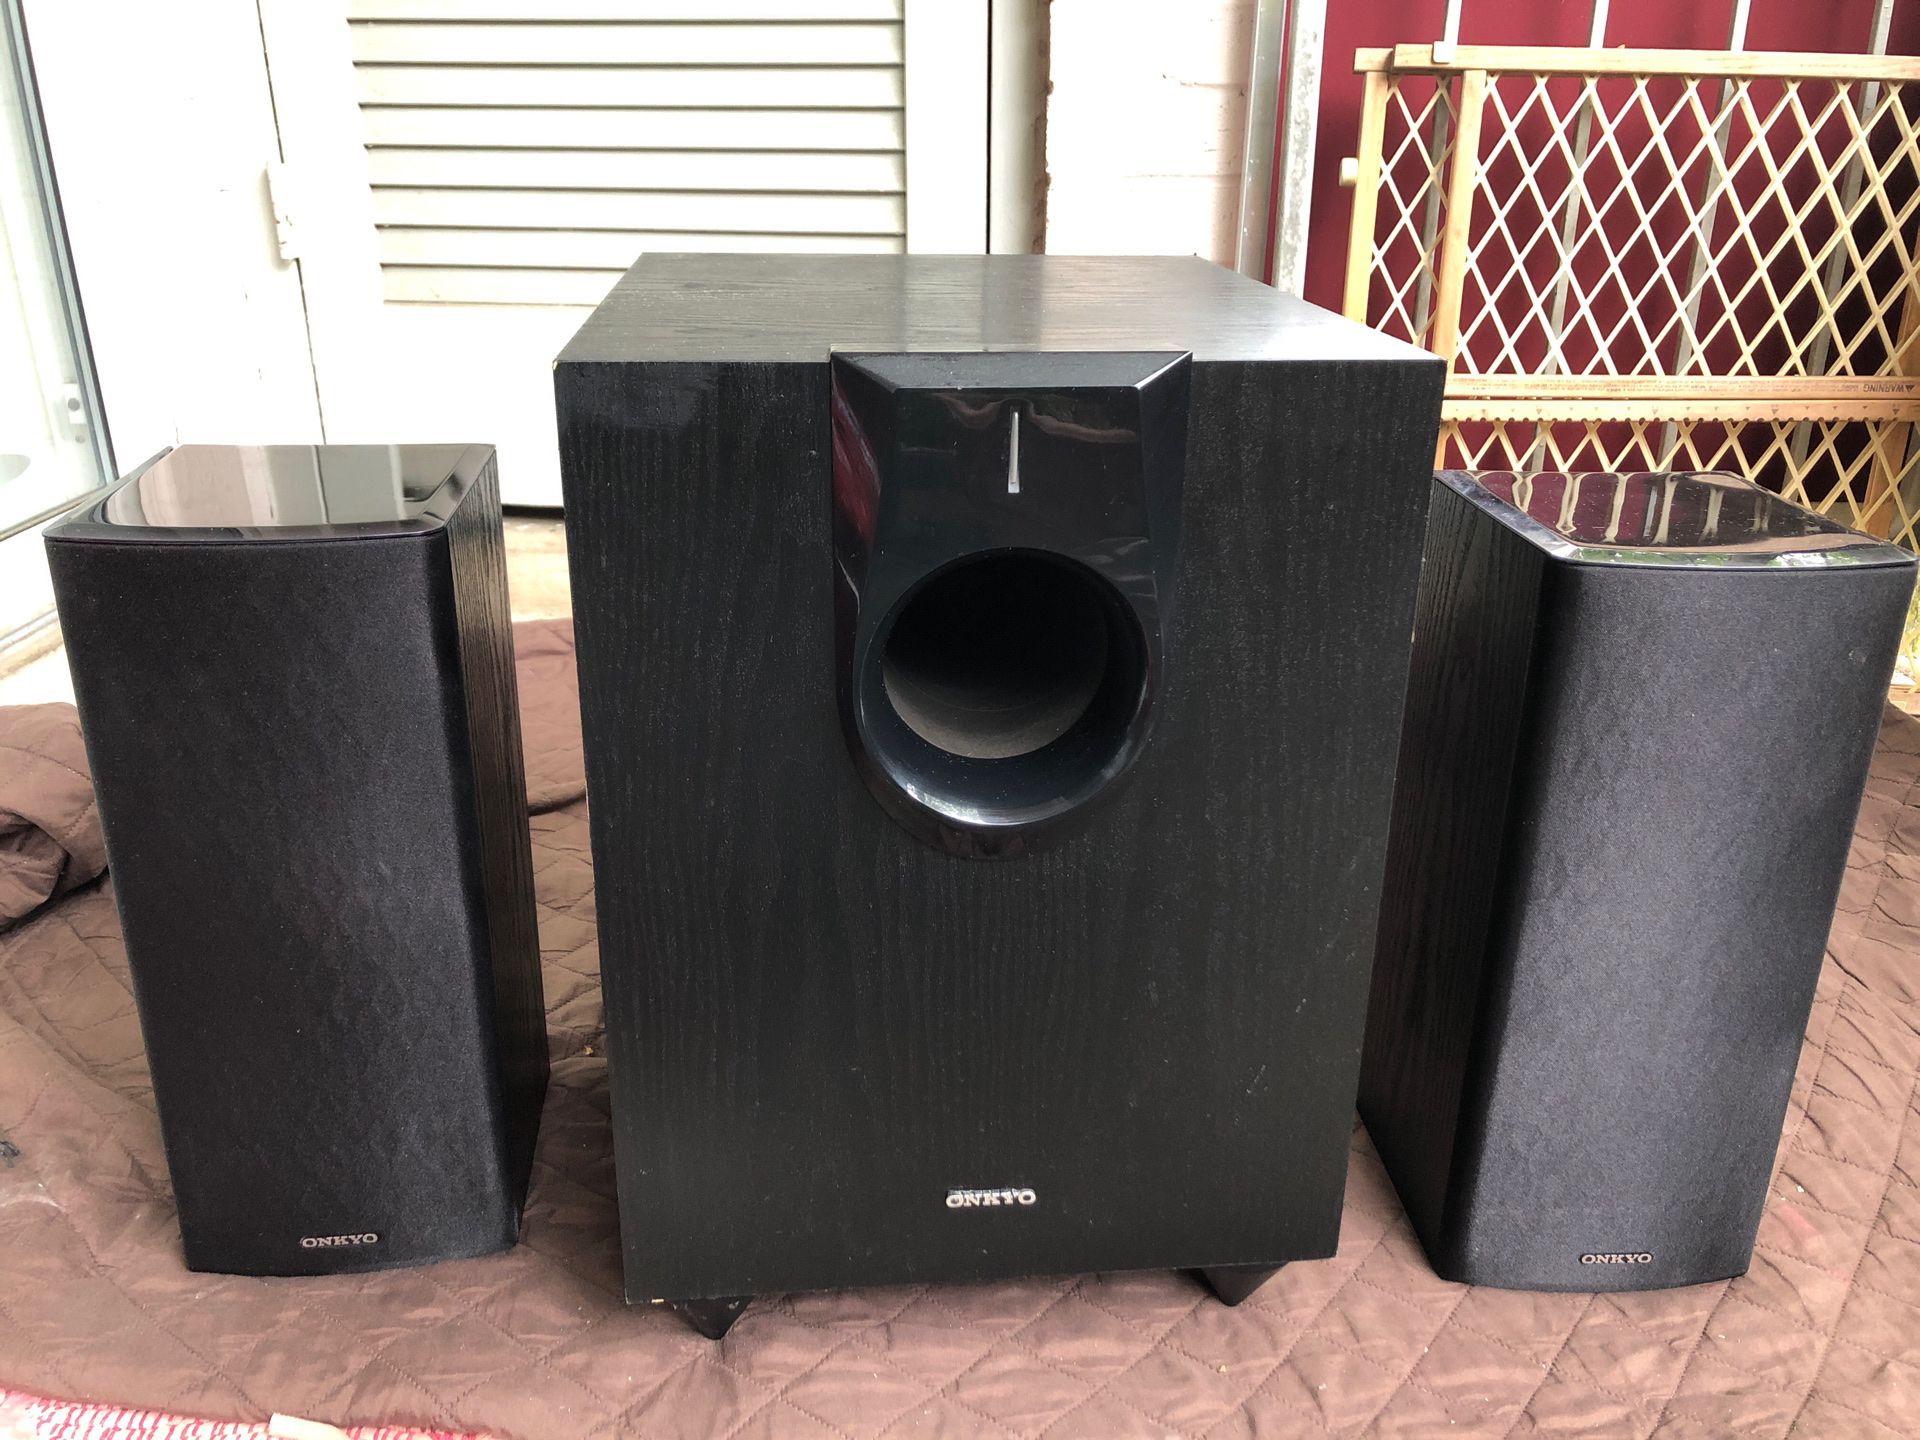 Onkyo subwoofer and front speakers